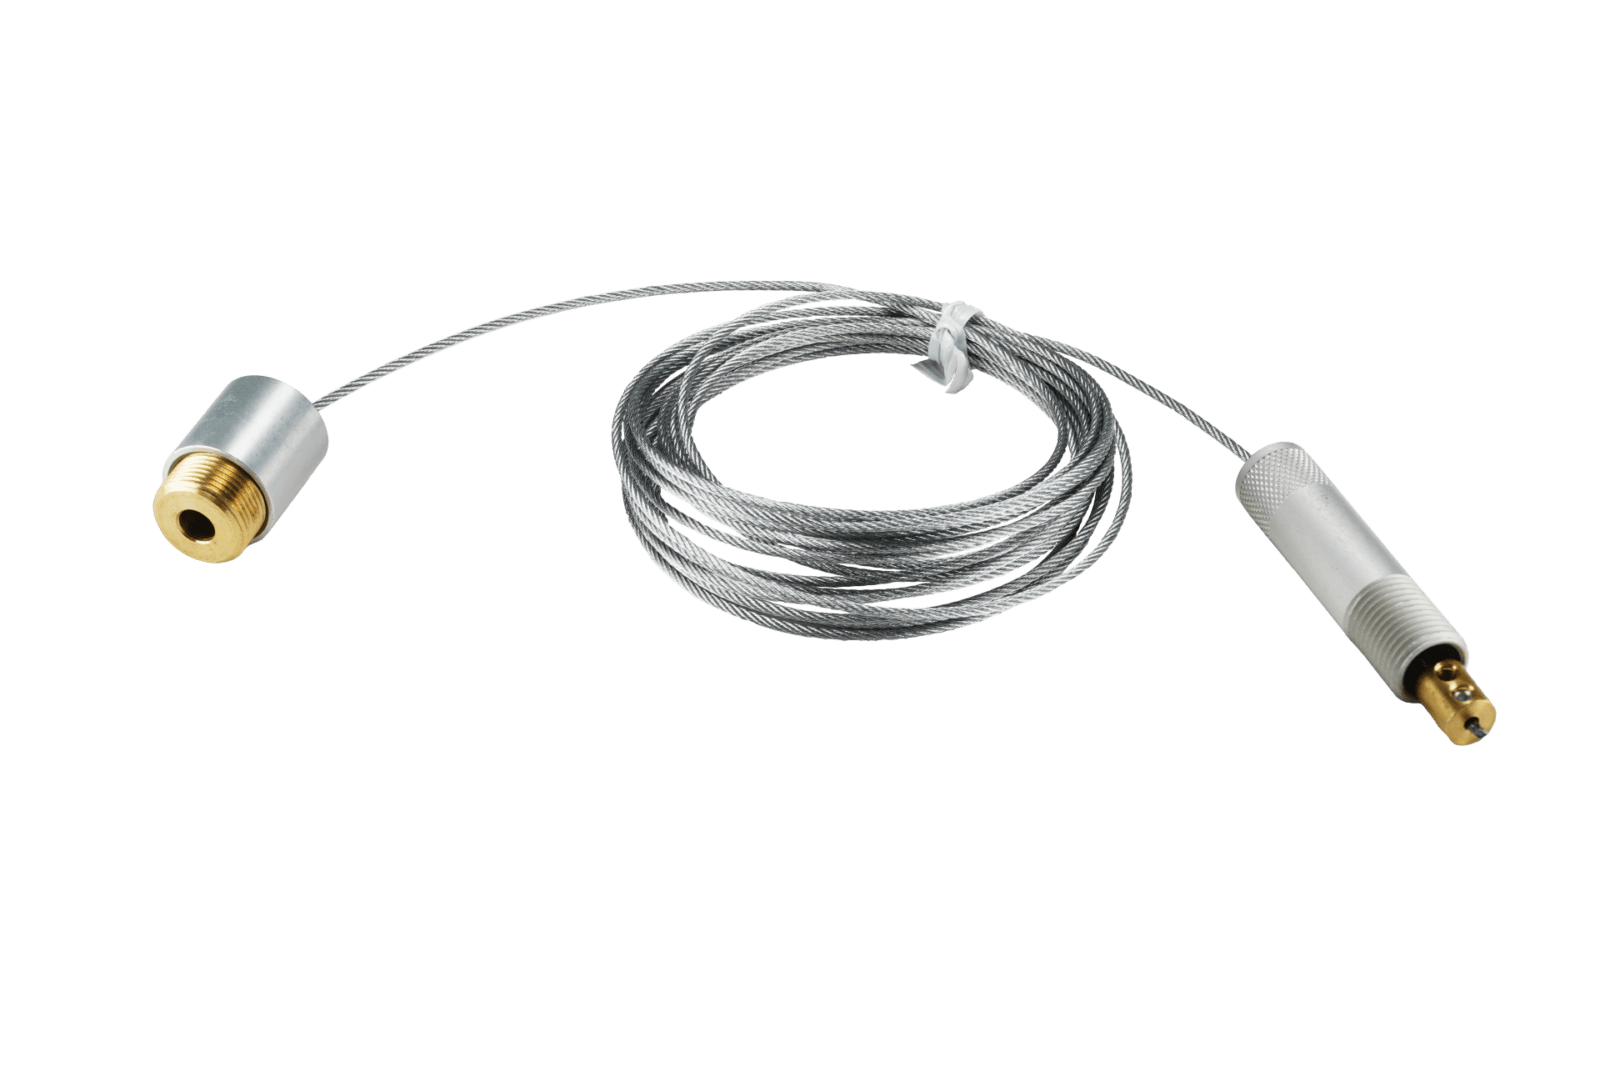 SEG Suspended Lightbox Cable Mounting Options using Galvanized Aircraft Cables